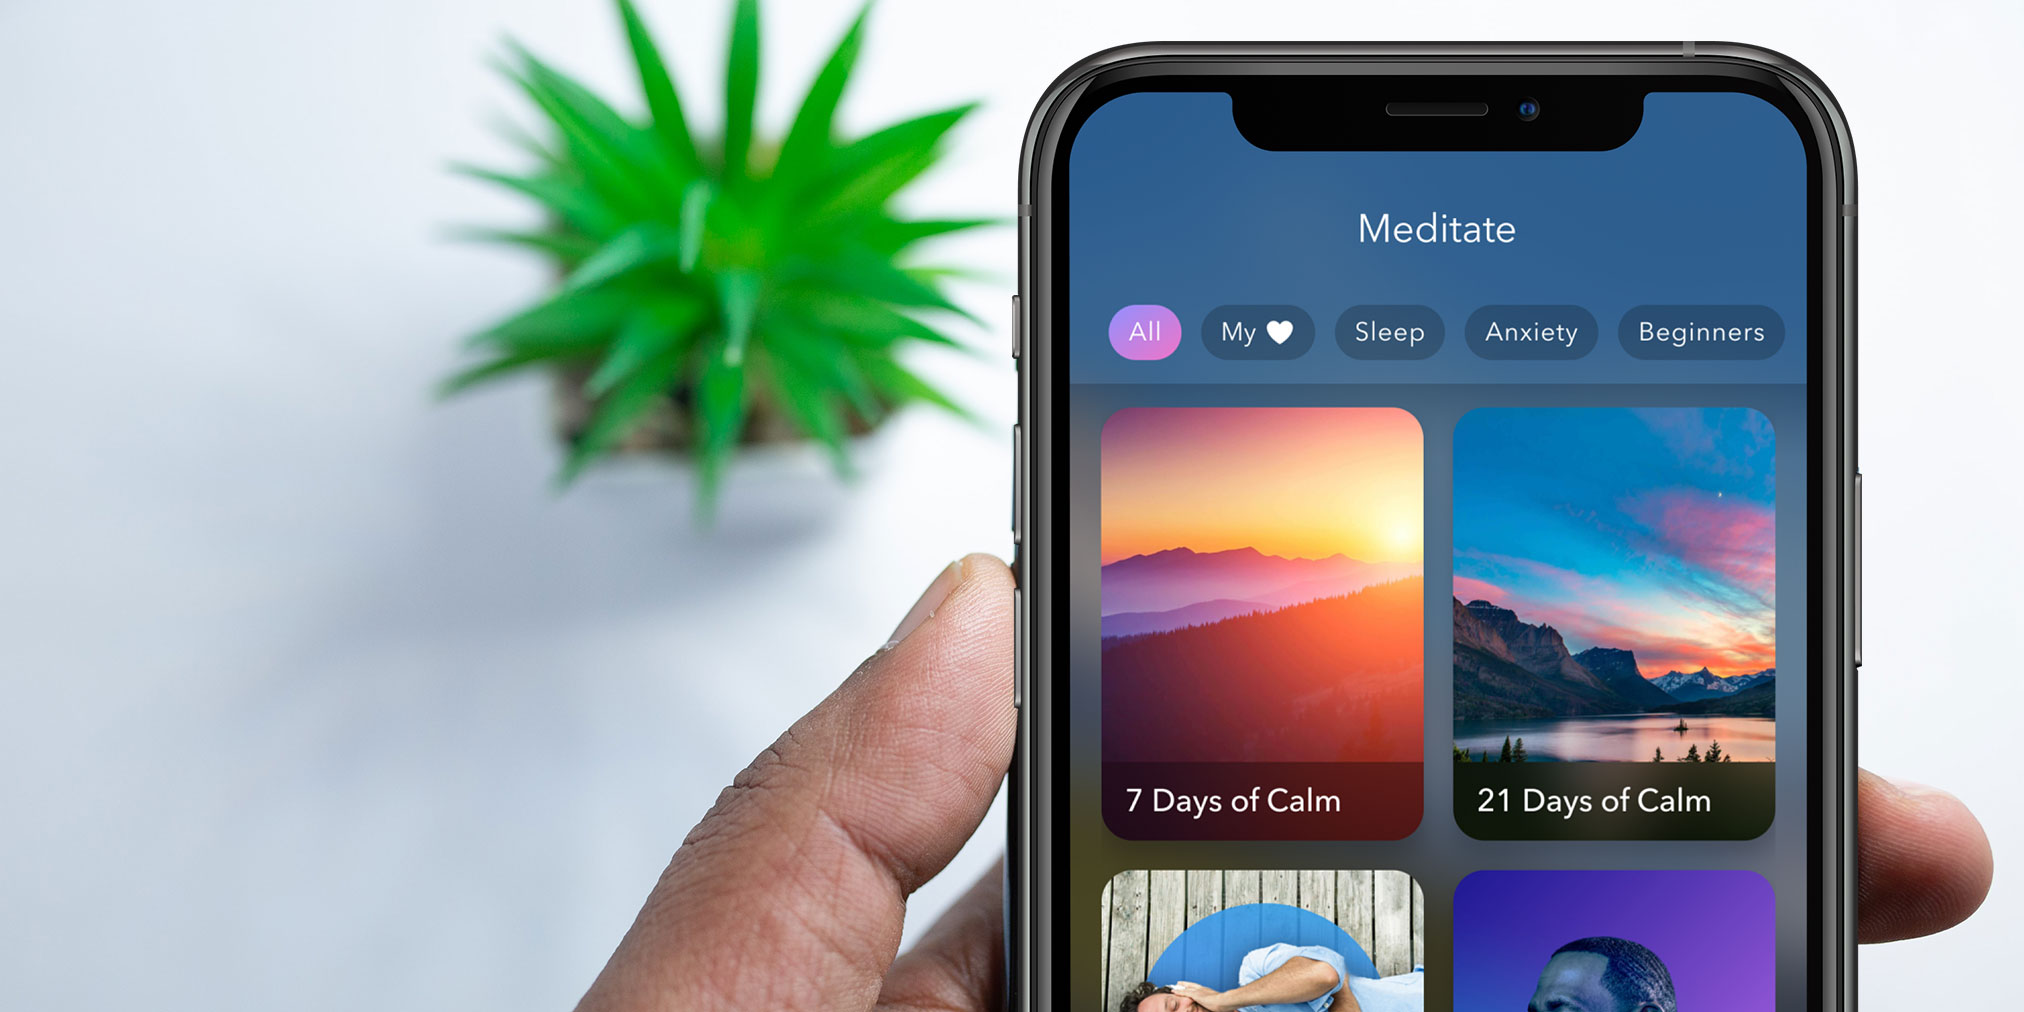 The five top-grossing mental wellness apps in the U.S. saw their installs from November 3 to November 5 grow by 30% week-over-week